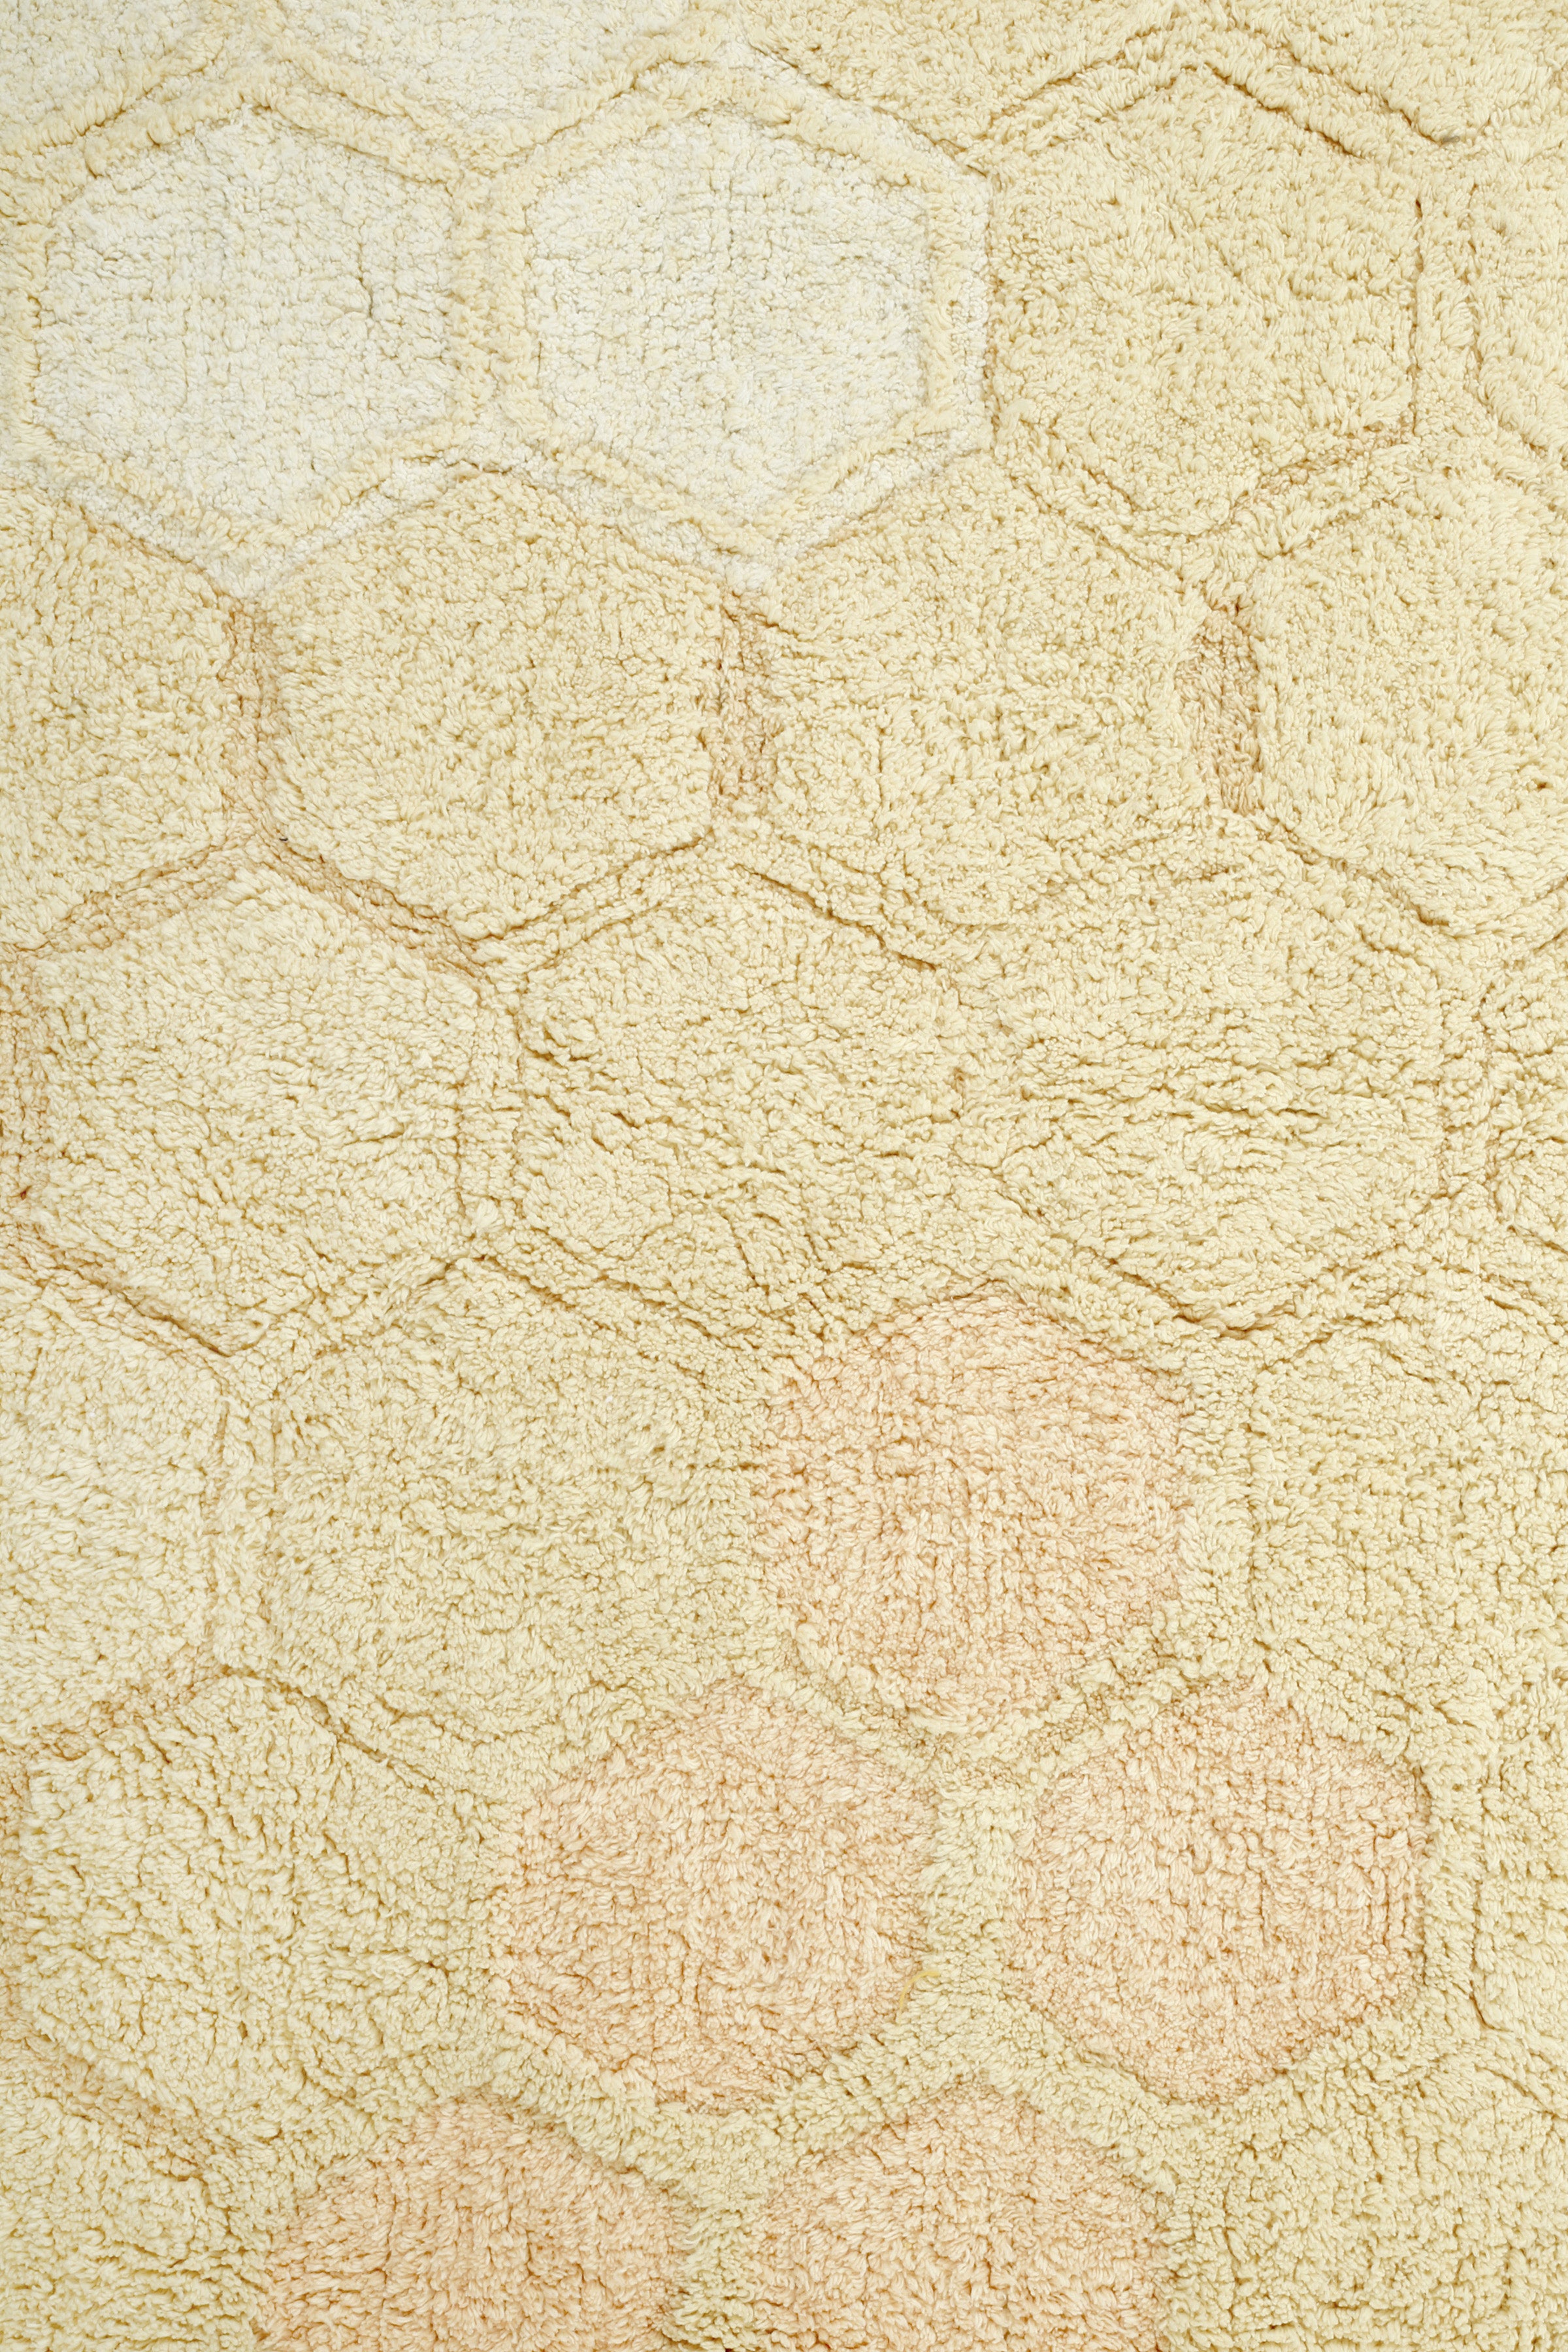 Rectangle gold rug with honeycomb pattern